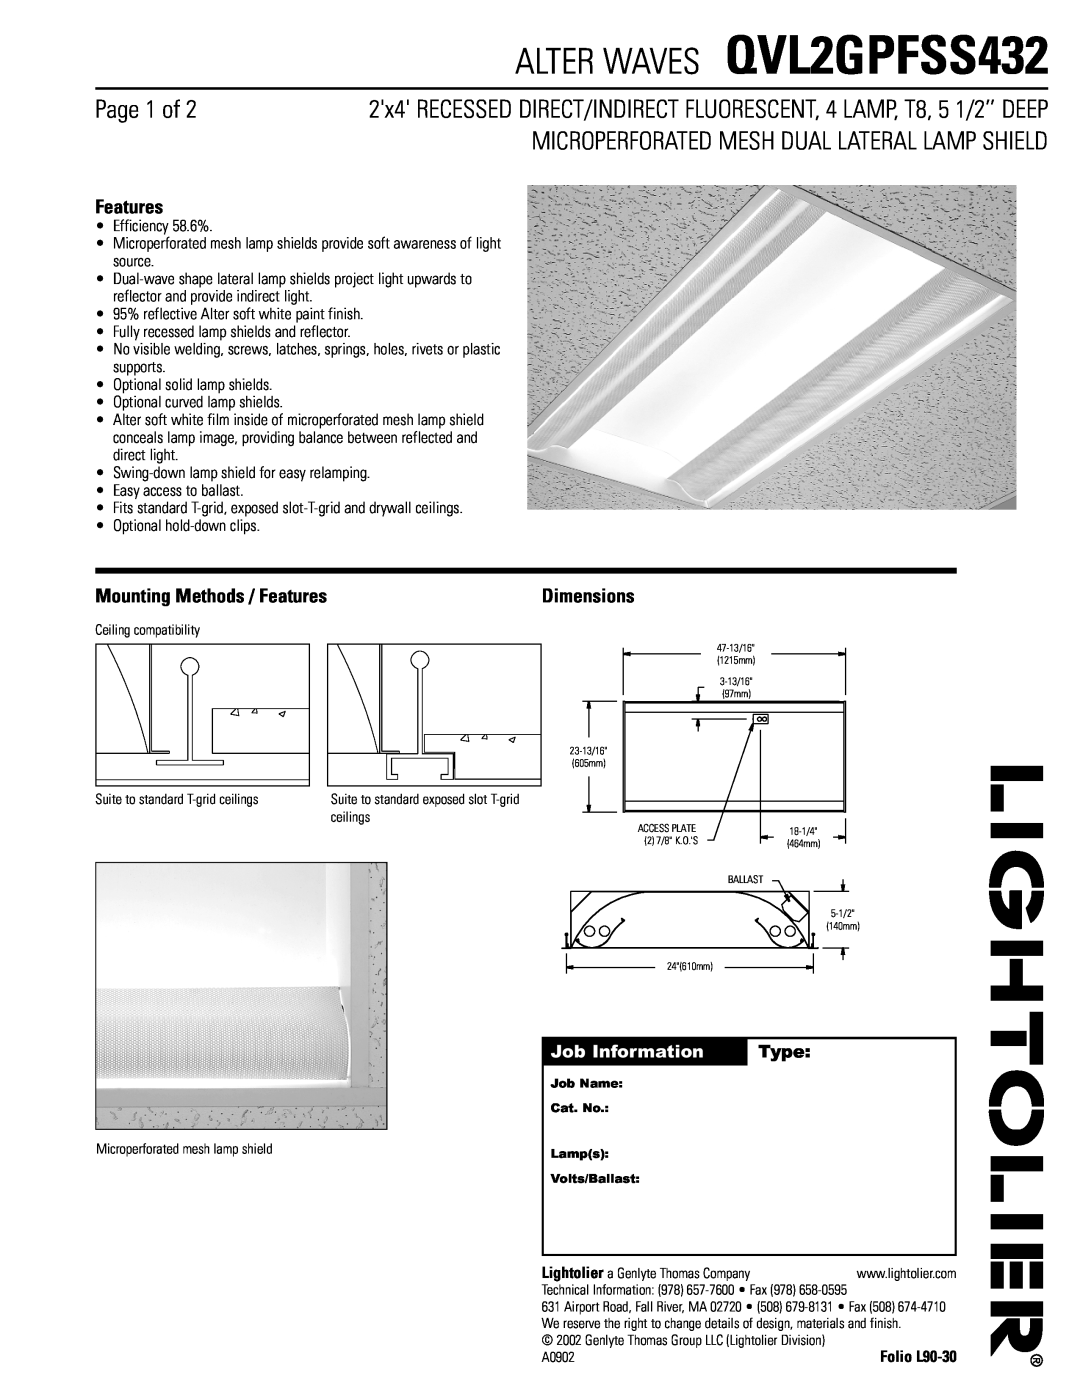 Lightolier dimensions ALTER WAVES QVL2GPFSS432, Page 1 of, Microperforated Mesh Dual Lateral Lamp Shield, Features 